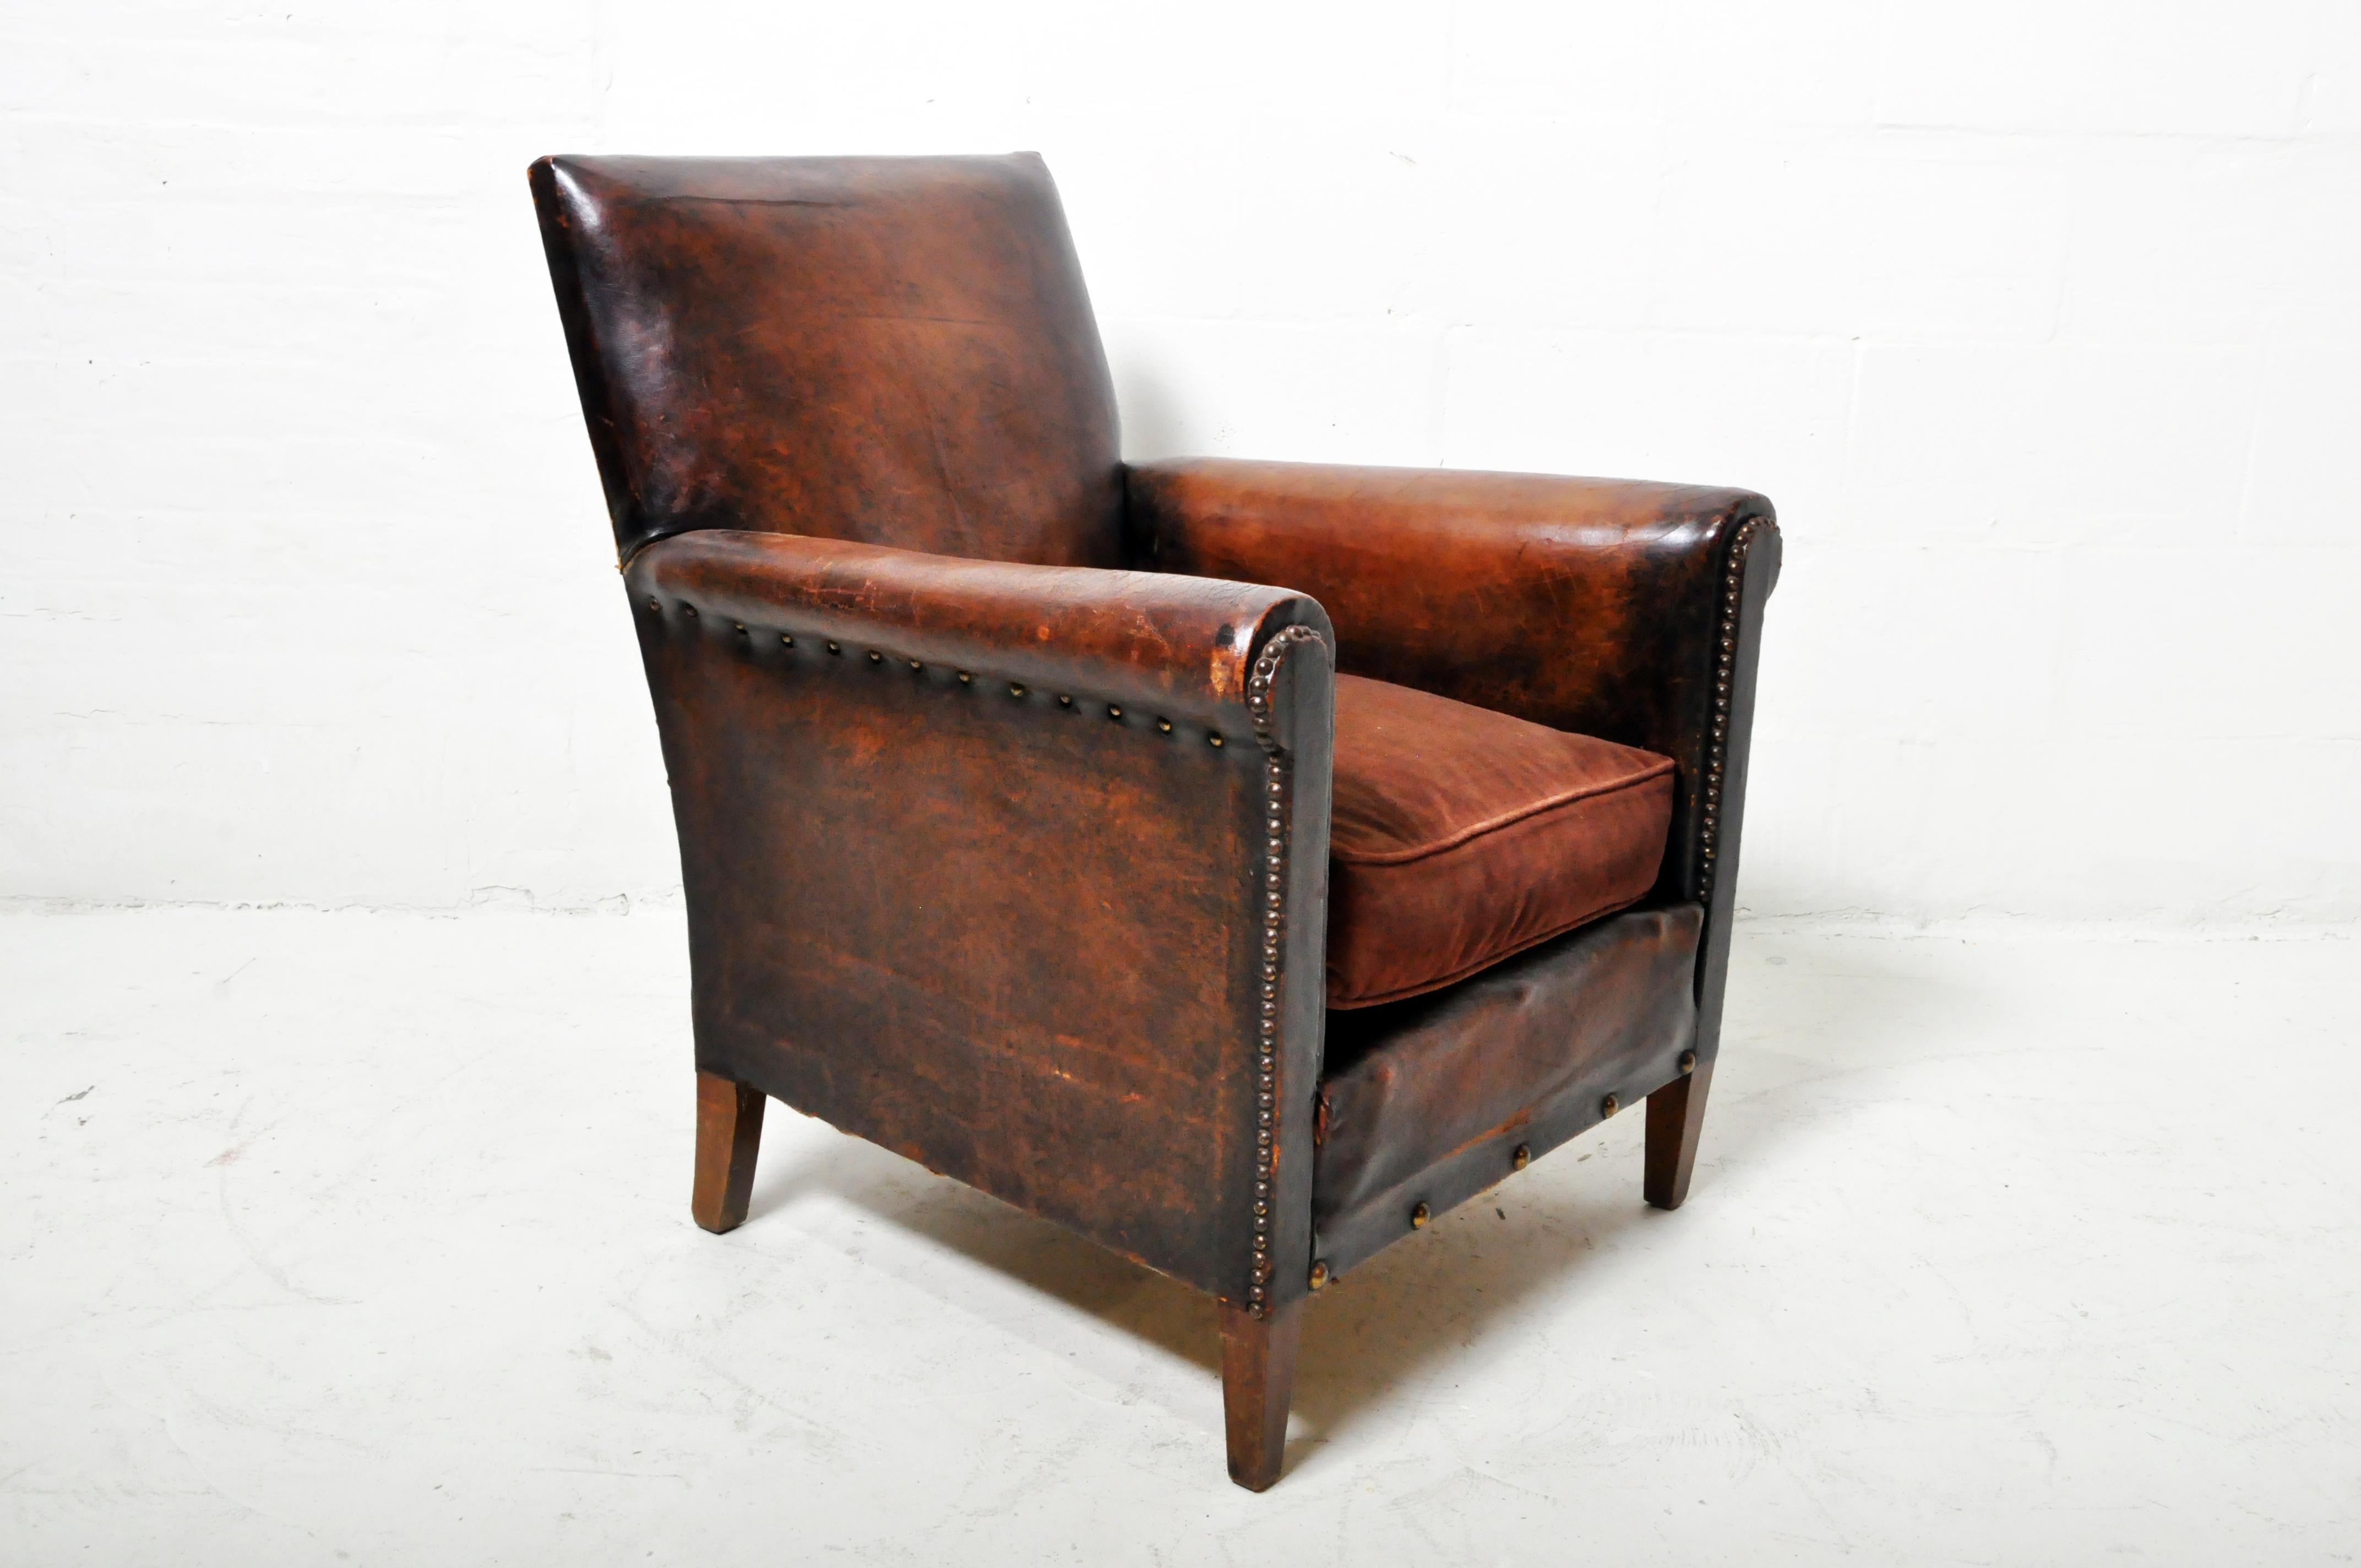 This petite 1930's leather club chair has a richly aged patina and tasteful proportions.  The soft lamb leather is  without large tears or gashes --good condition, considering its age and use.   The nailheads are almost all original, with only a few